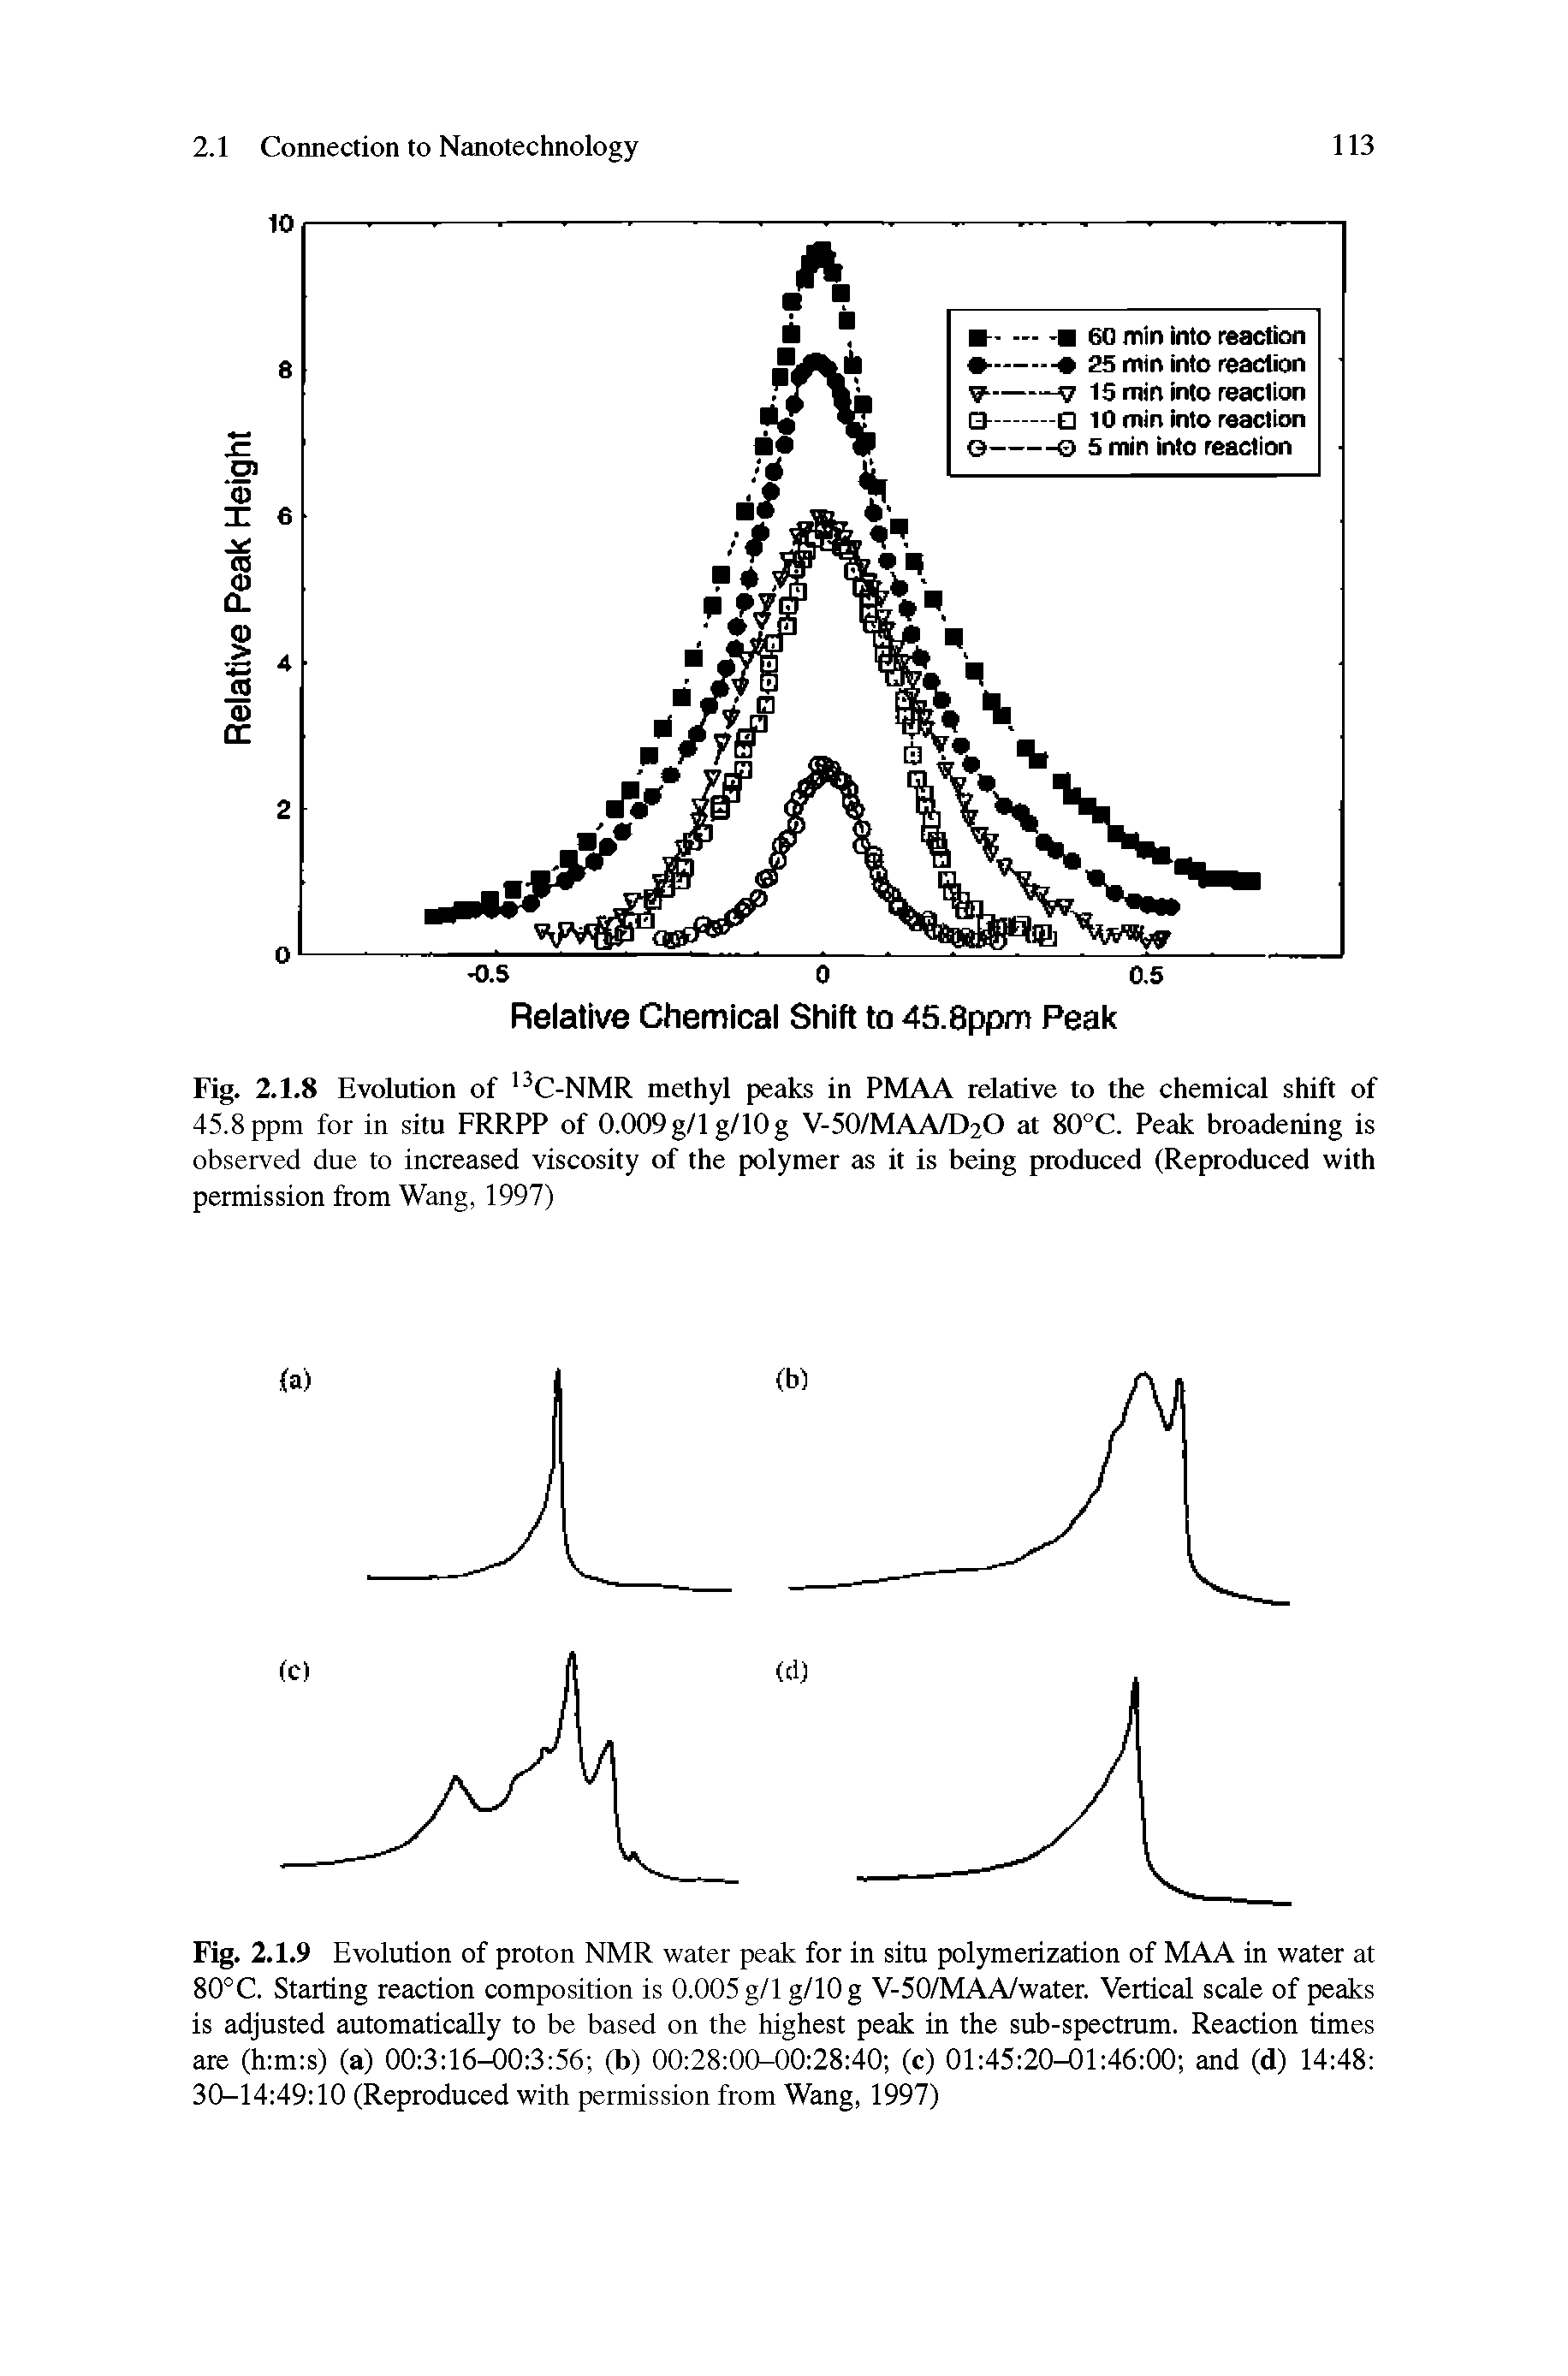 Fig. 2.1.9 Evolution of proton NMR water peak for in situ polymerization of MAA in water at 80°C. Starting reaction composition is 0.005 g/1 g/lOg V-50/MAA/water. Vertical scale of peaks is adjusted automatically to be based on the highest peak in the sub-spectrum. Reaction times are (h m s) (a) 00 3 16-00 3 56 (b) 00 28 00-00 28 40 (c) 01 45 20-01 46 00 and (d) 14 48 30-14 49 10 (Reproduced with permission from Wang, 1997)...